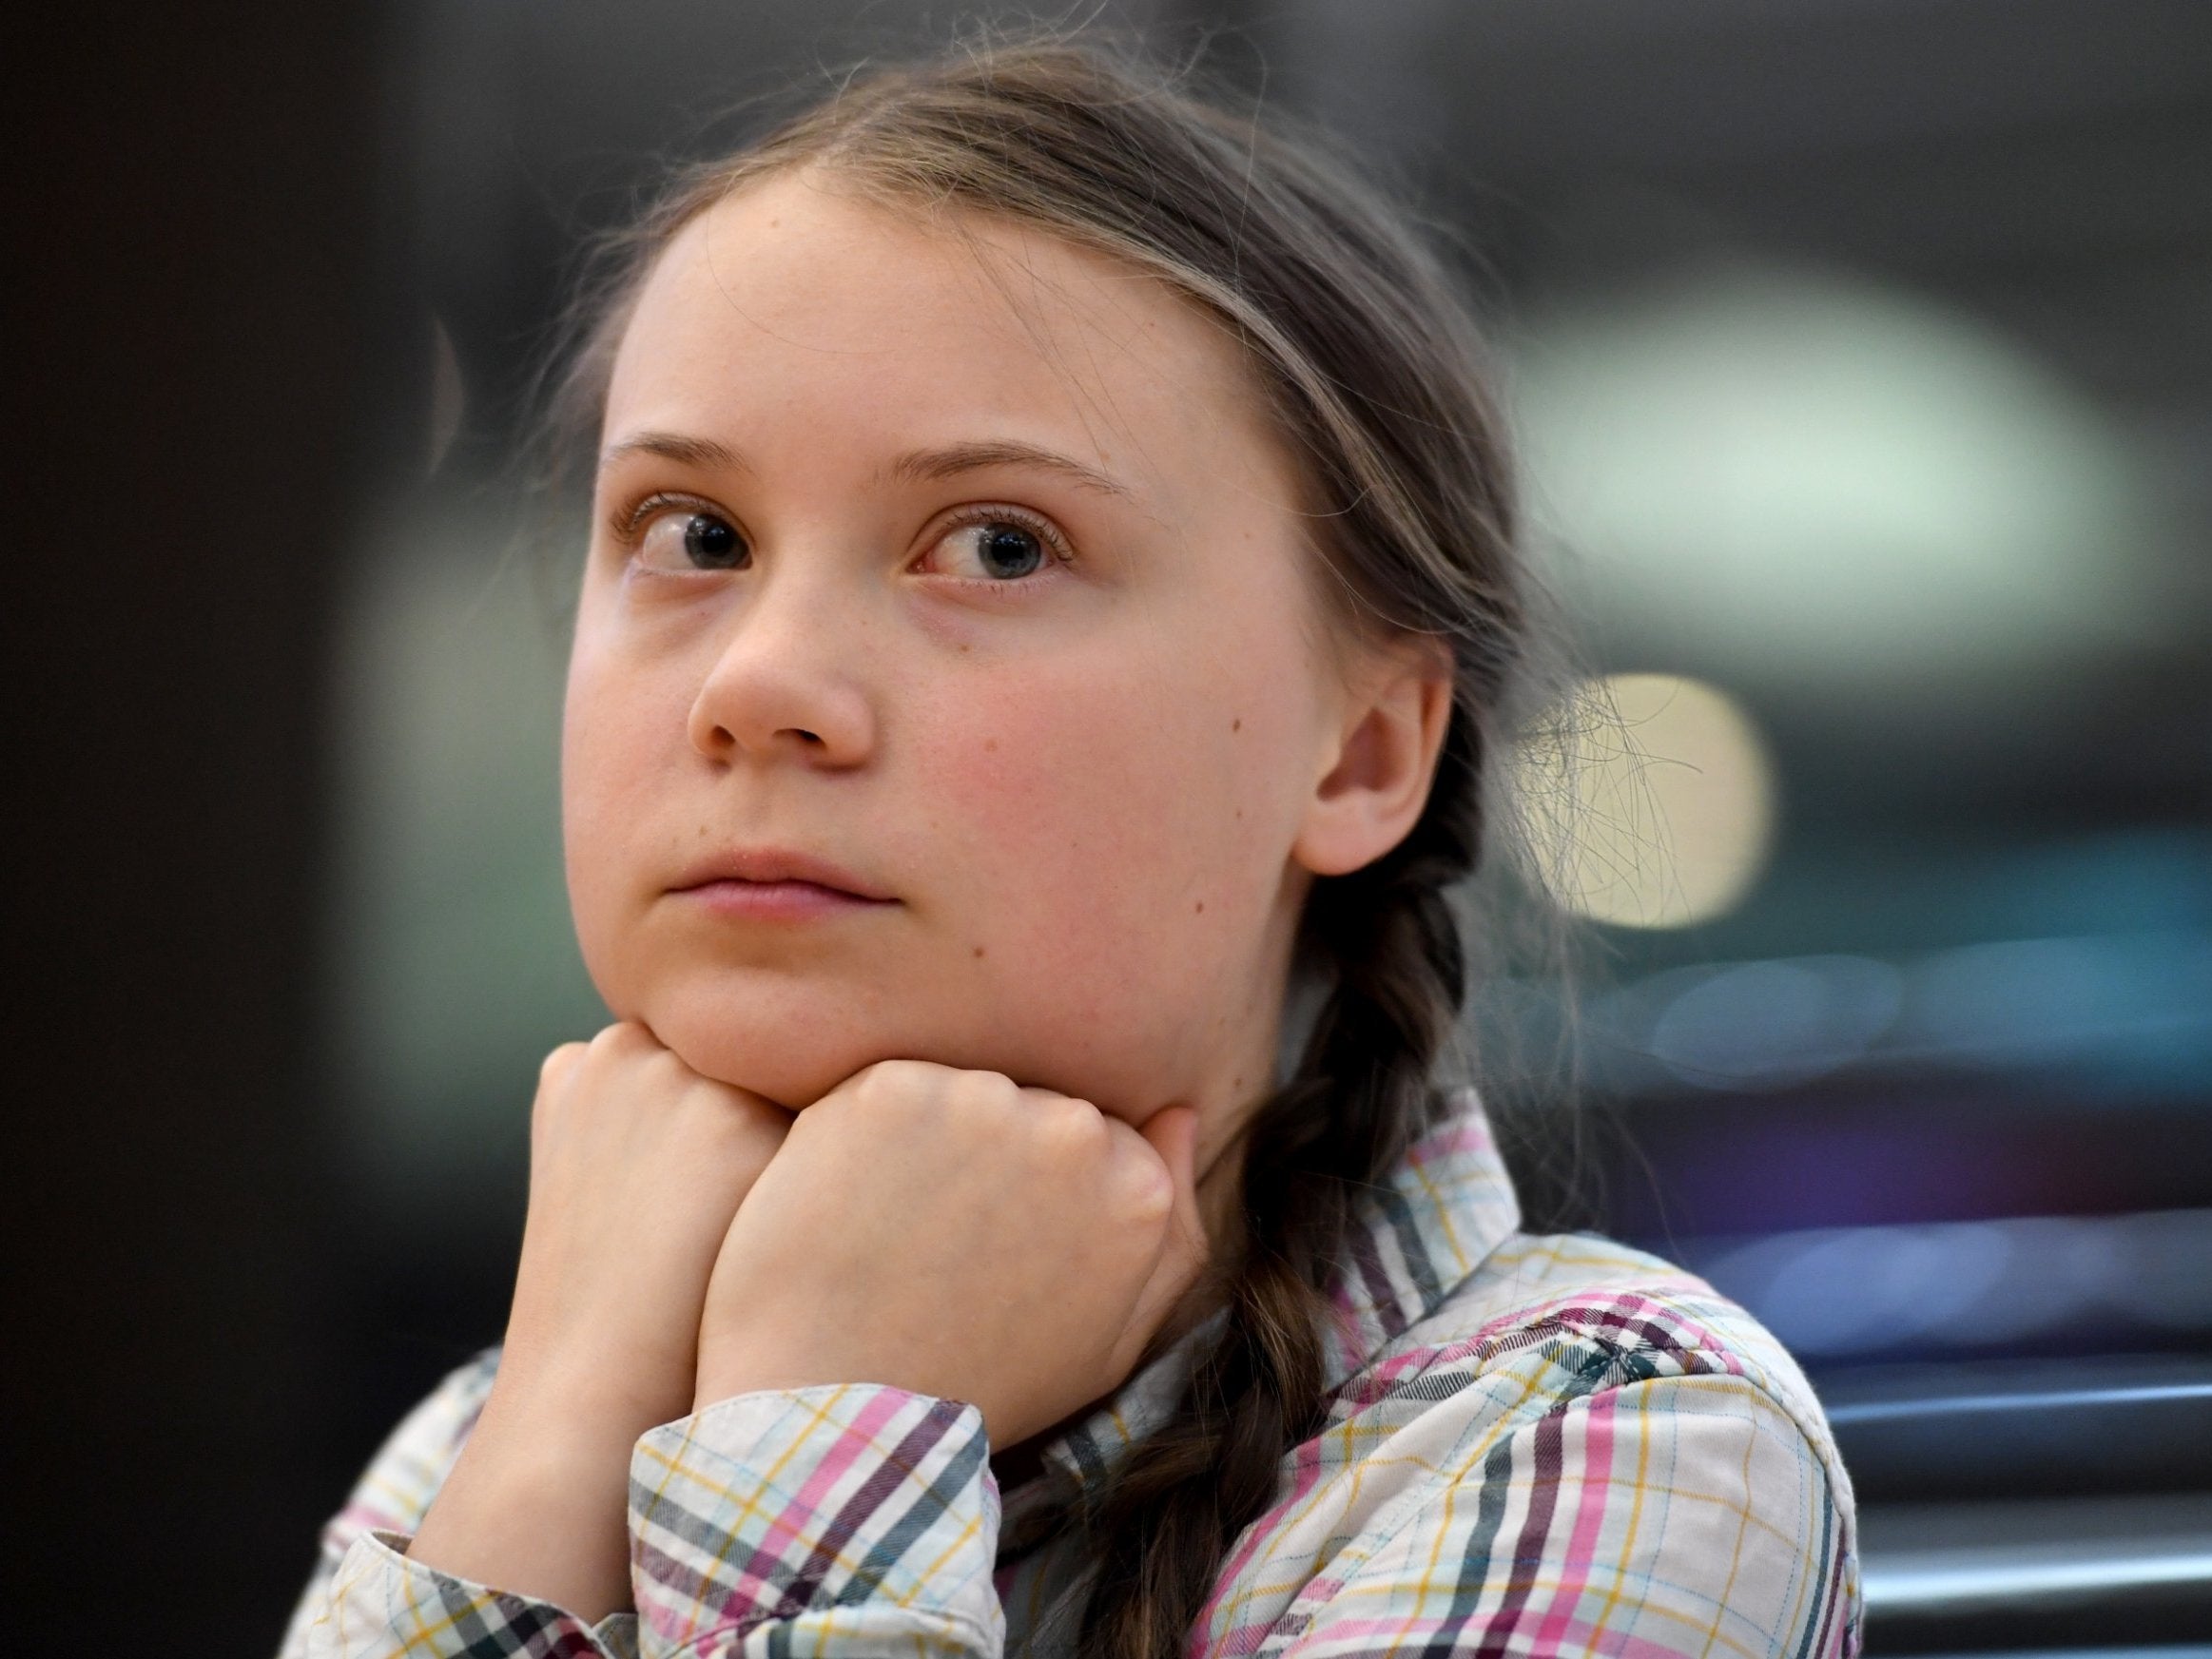 Greta Thunberg has been maligned by the far right for her climate activism